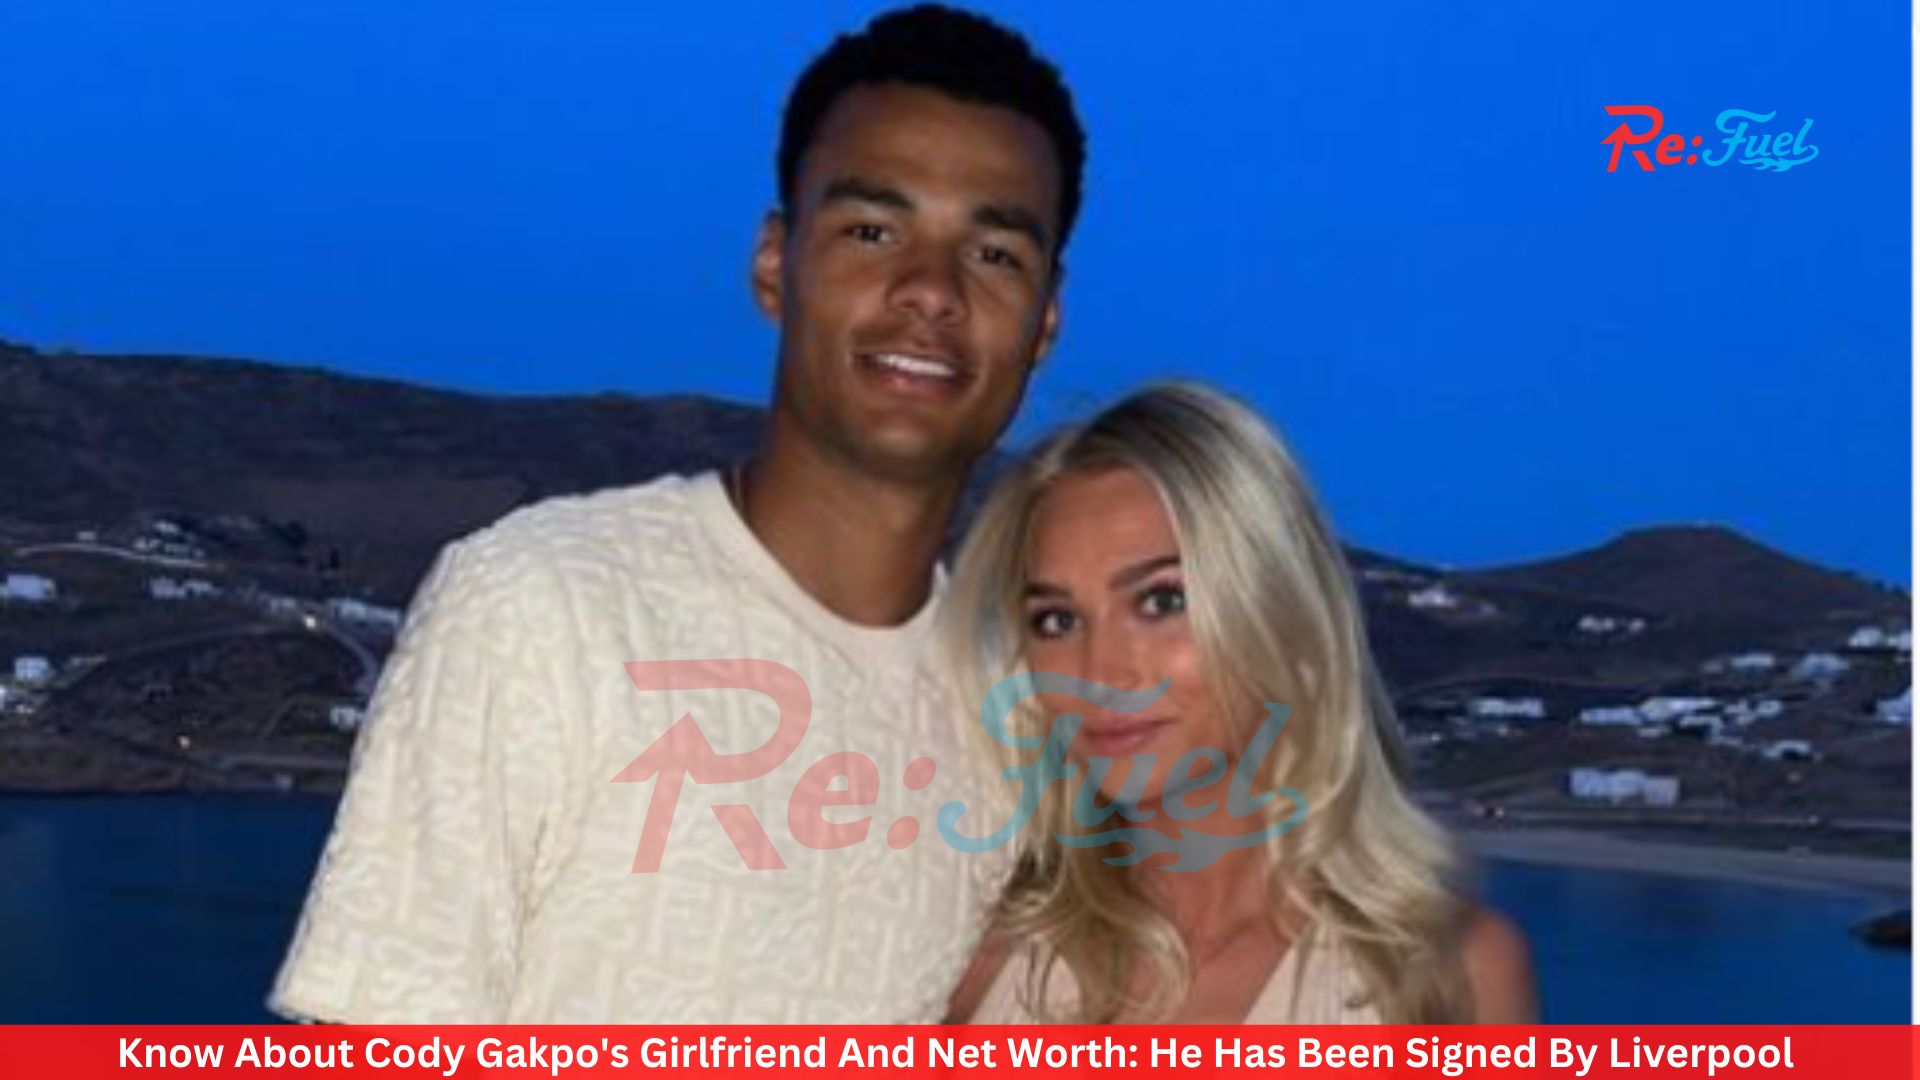 Know About Cody Gakpo's Girlfriend And Net Worth: He Has Been Signed By Liverpool